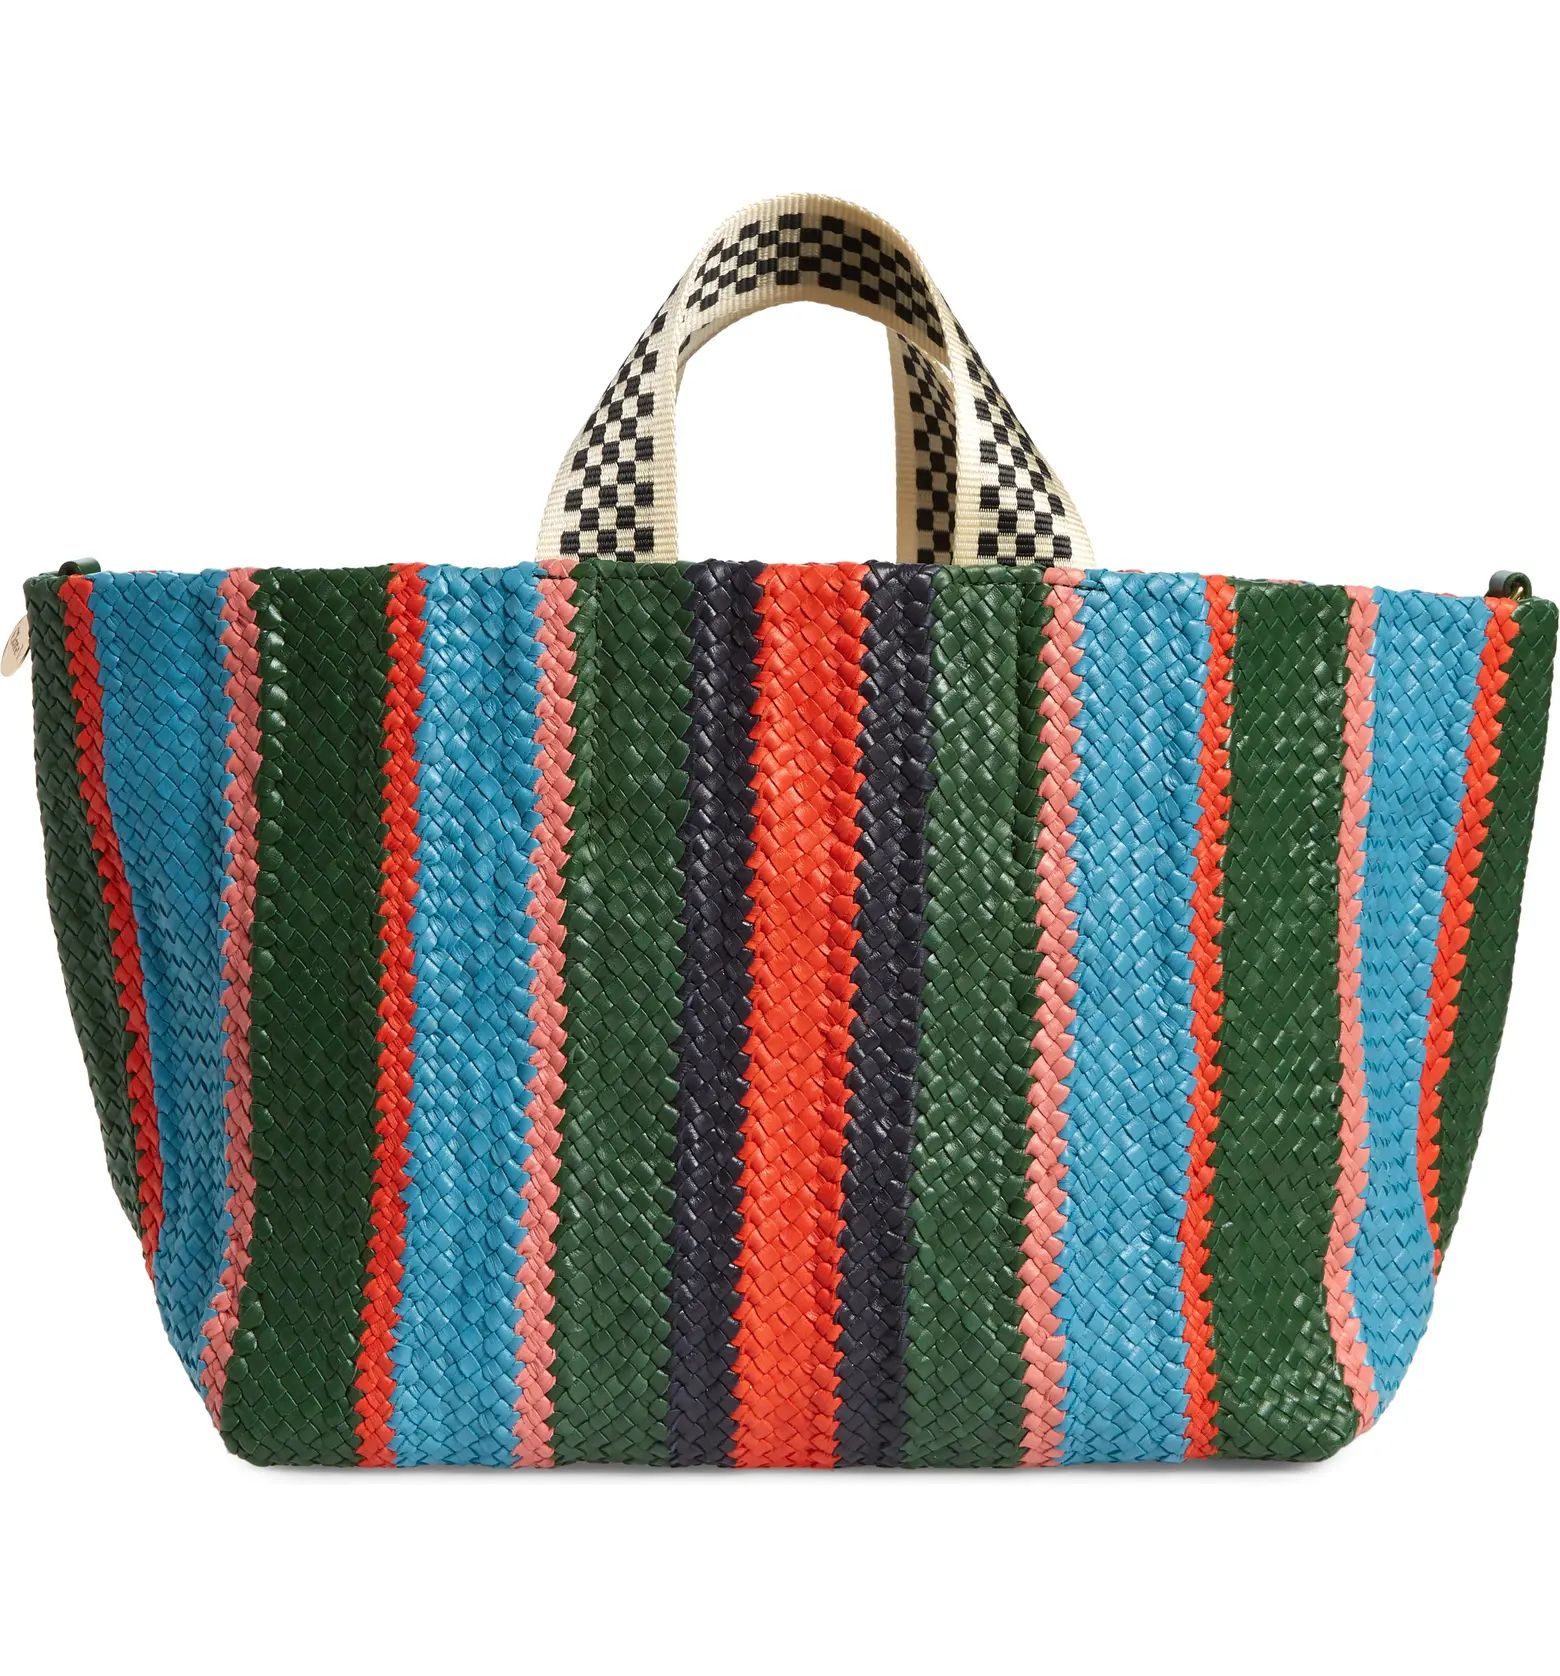 Bateau Woven Leather Tote | Nordstrom